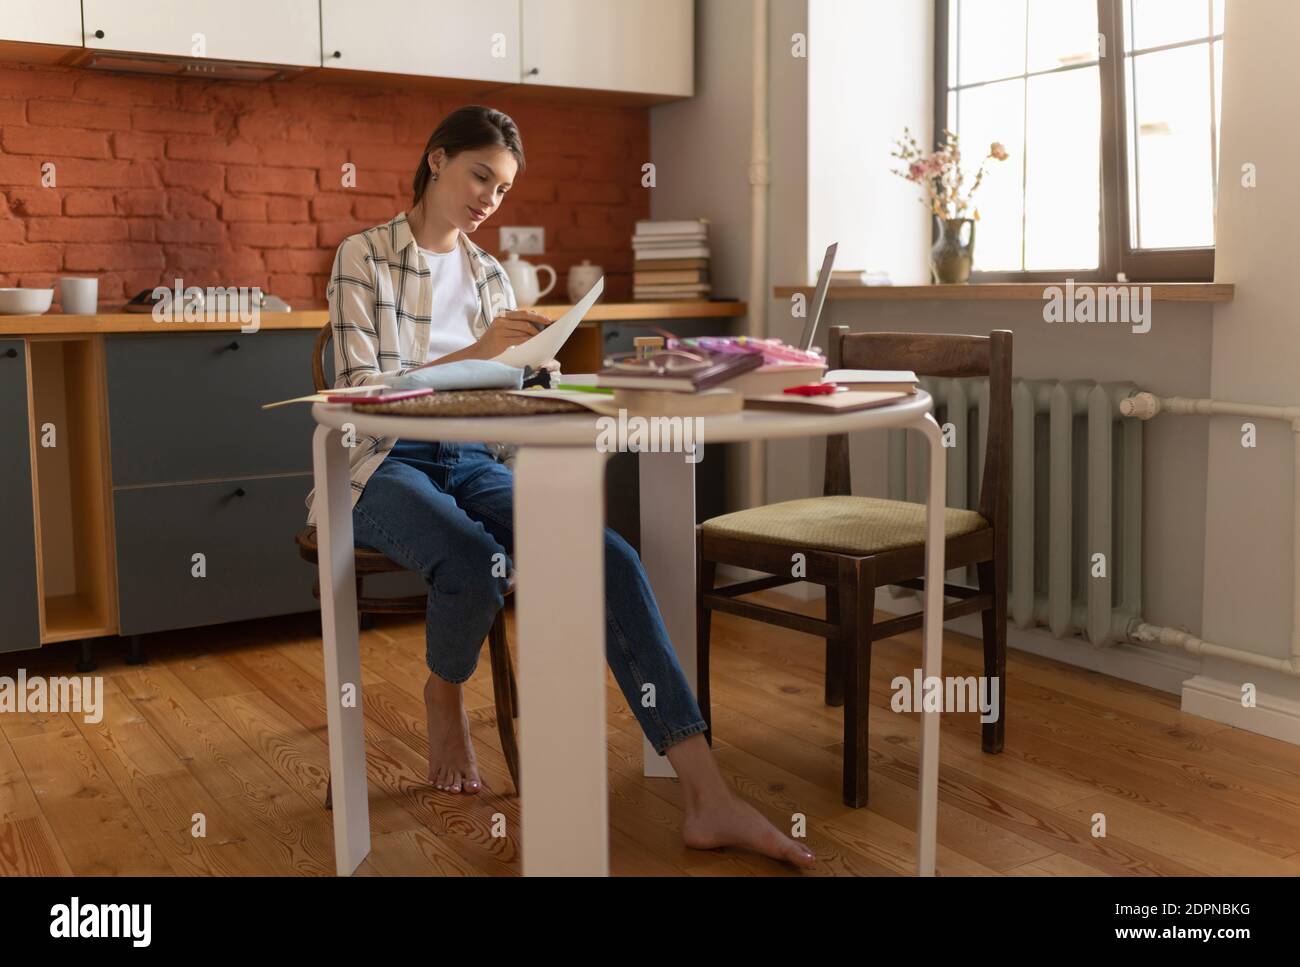 Female student in home wear preparing for exam and marking text with highlighter at table in kitchen Stock Photo